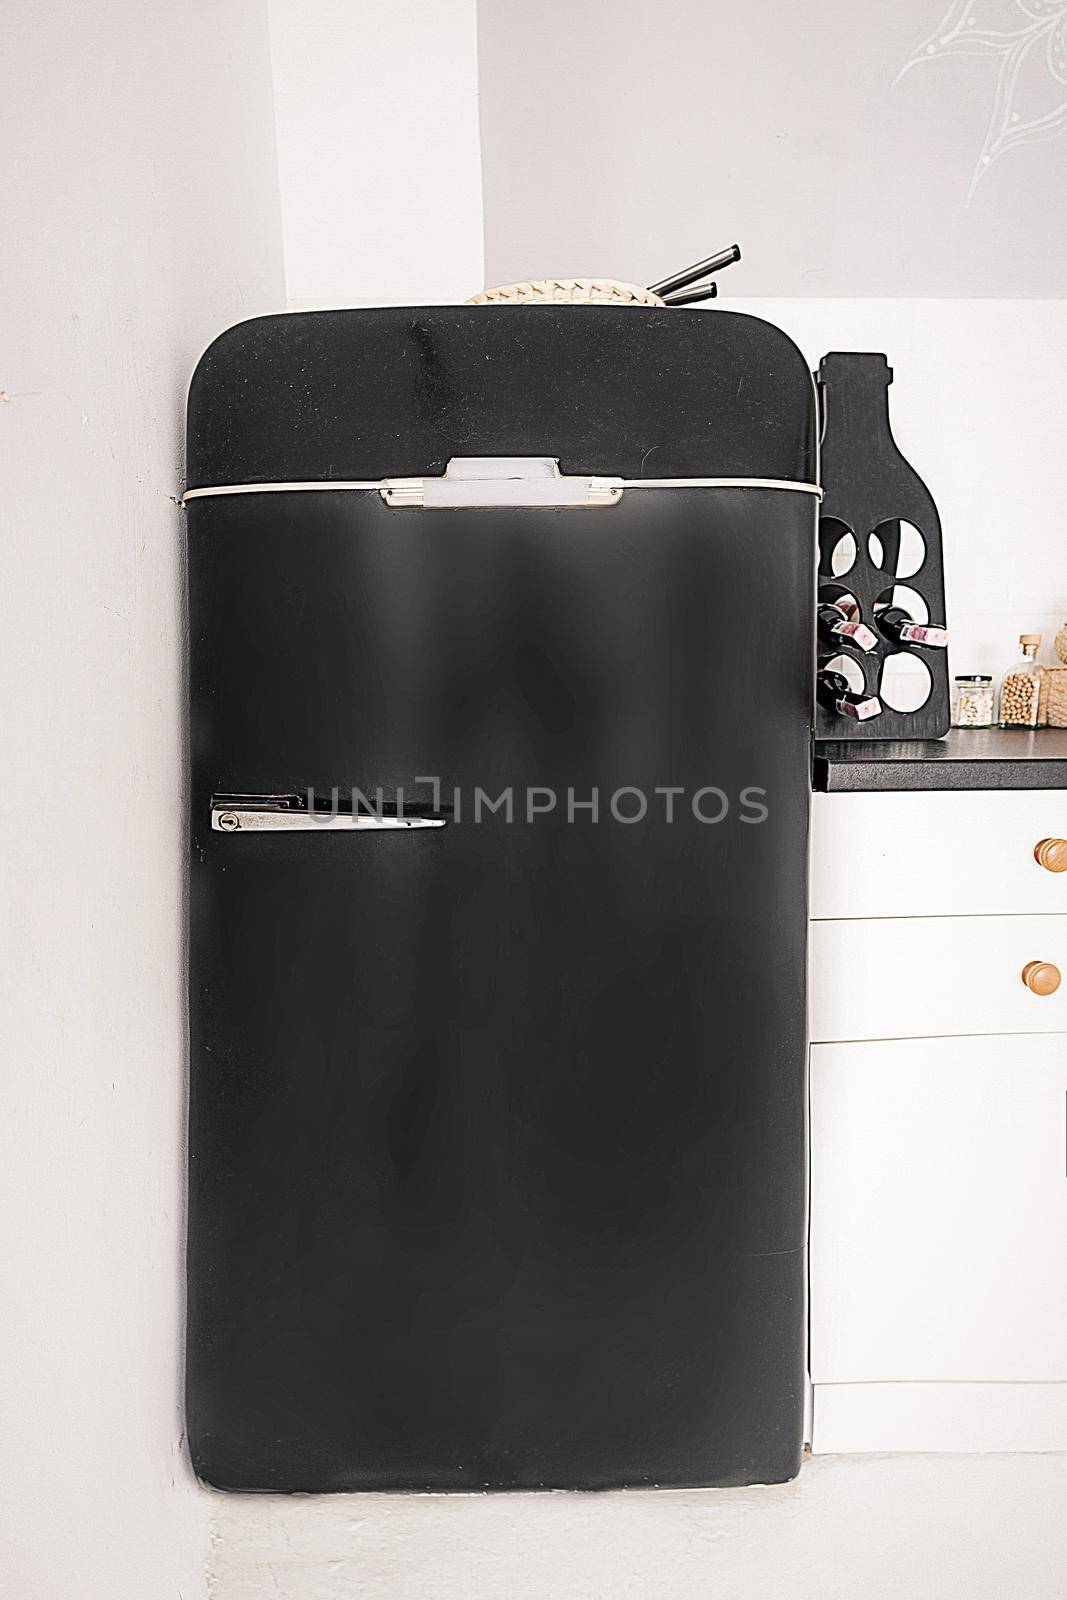 Small Black Retro Refrigerator in White Kitchen, Black Fridge in Vintage Style on White Background. Close-up. High quality photo